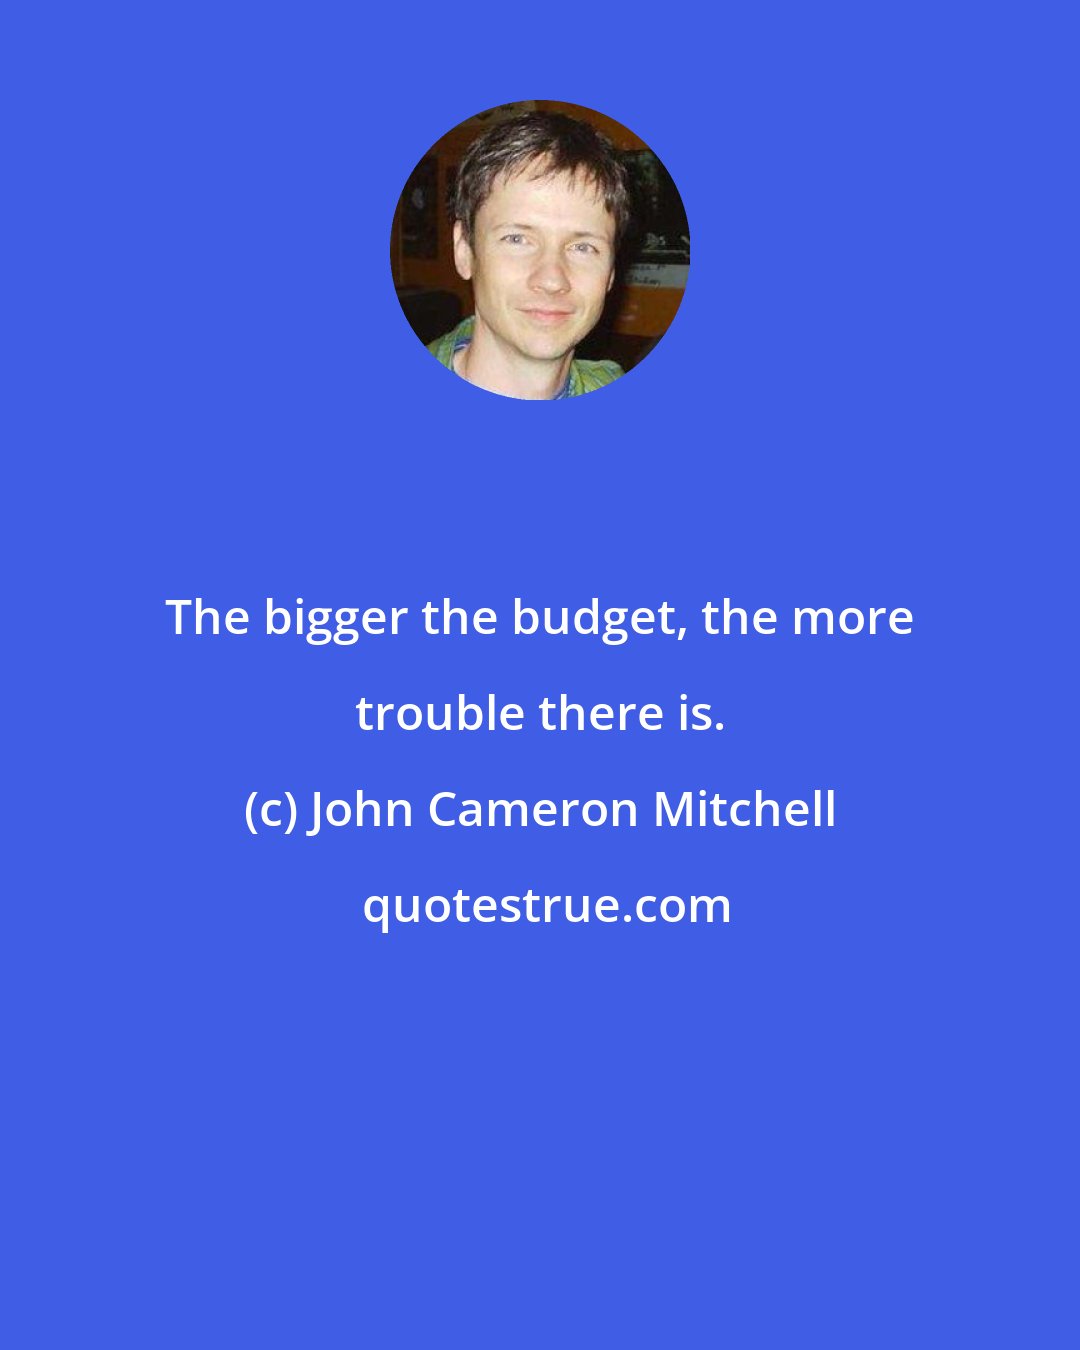 John Cameron Mitchell: The bigger the budget, the more trouble there is.